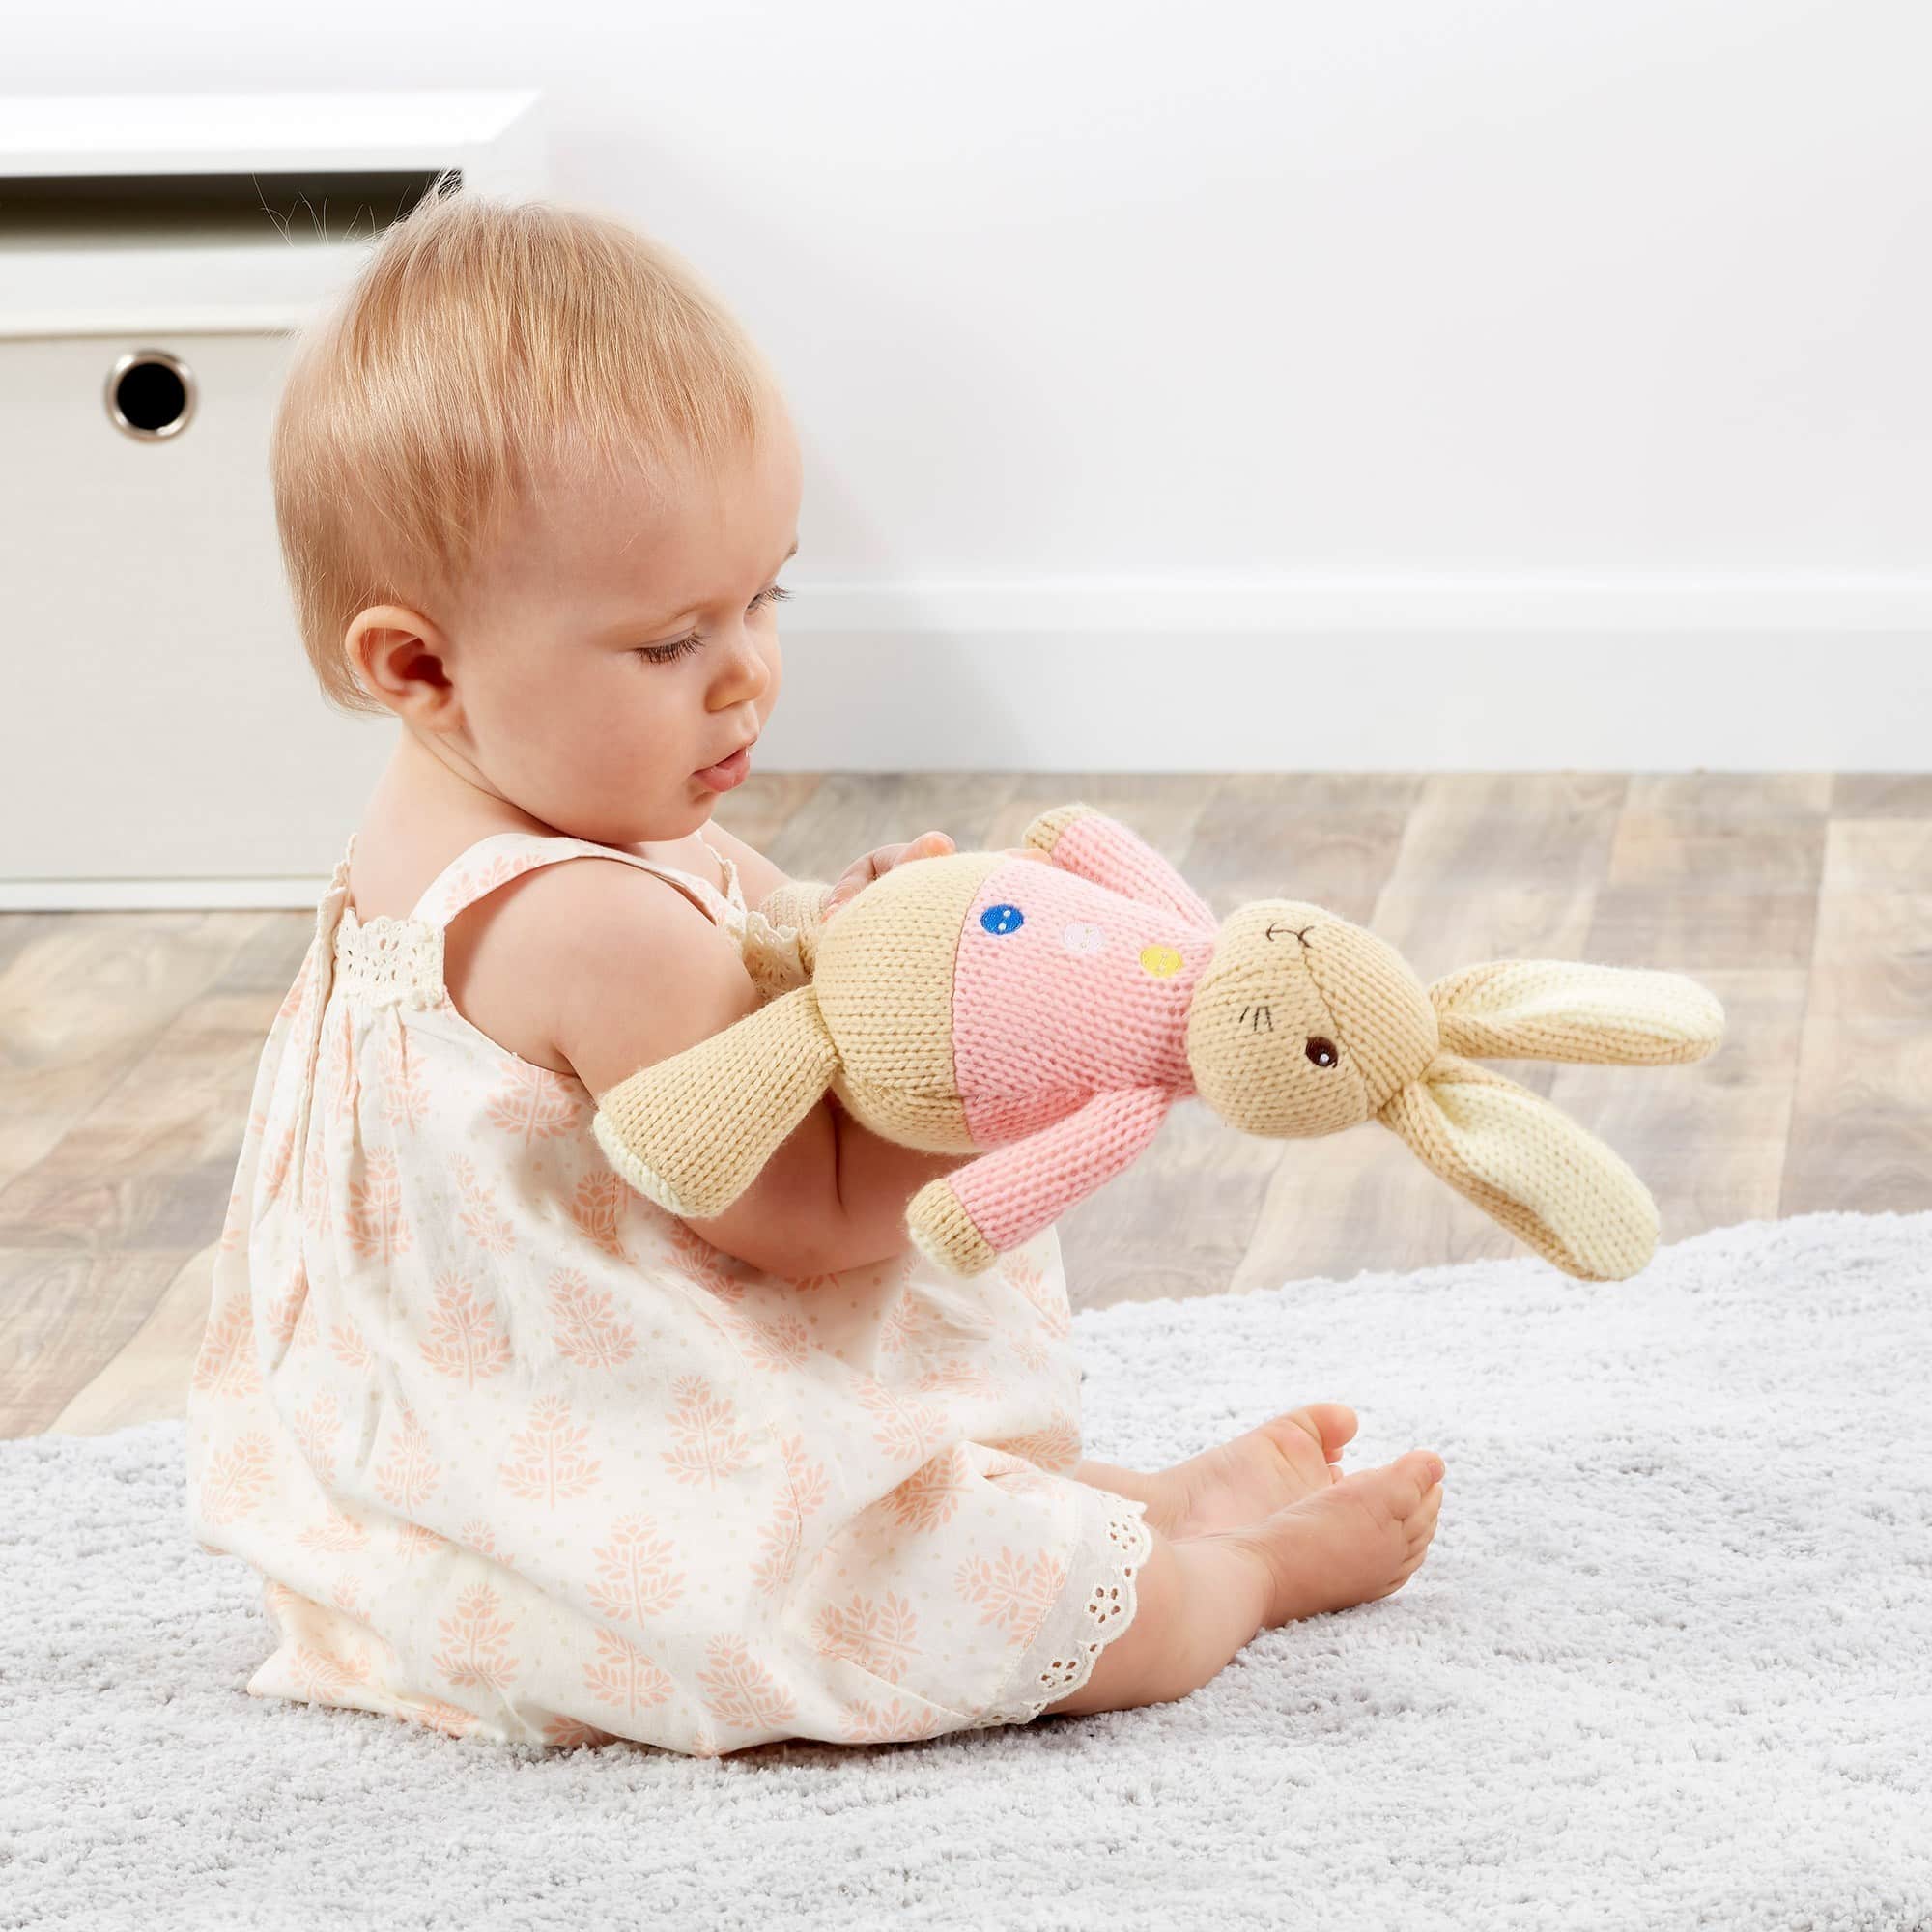 Peter Rabbit - Flopsy Made With Love Knitted Plush